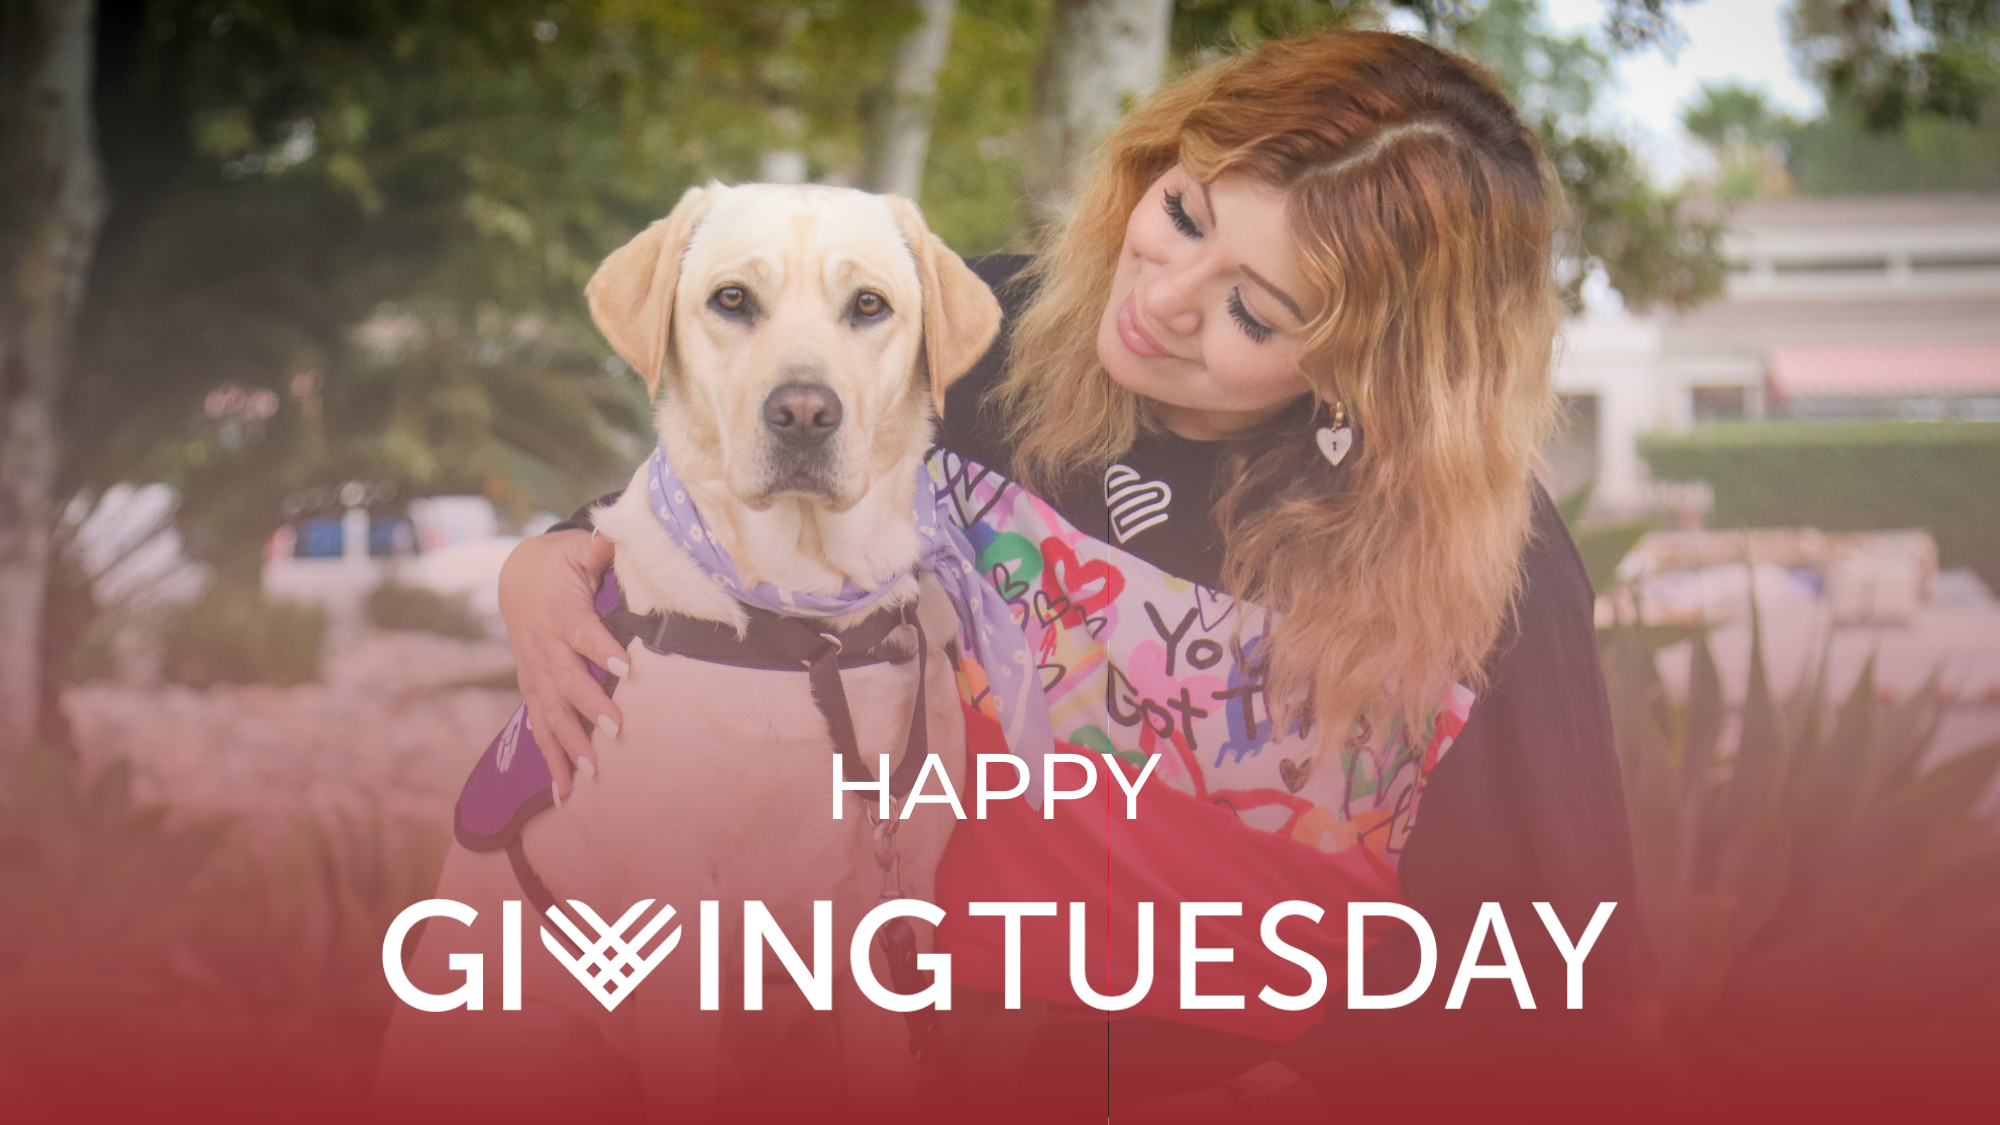 Please Support Guide Dogs of America on Giving Tuesday